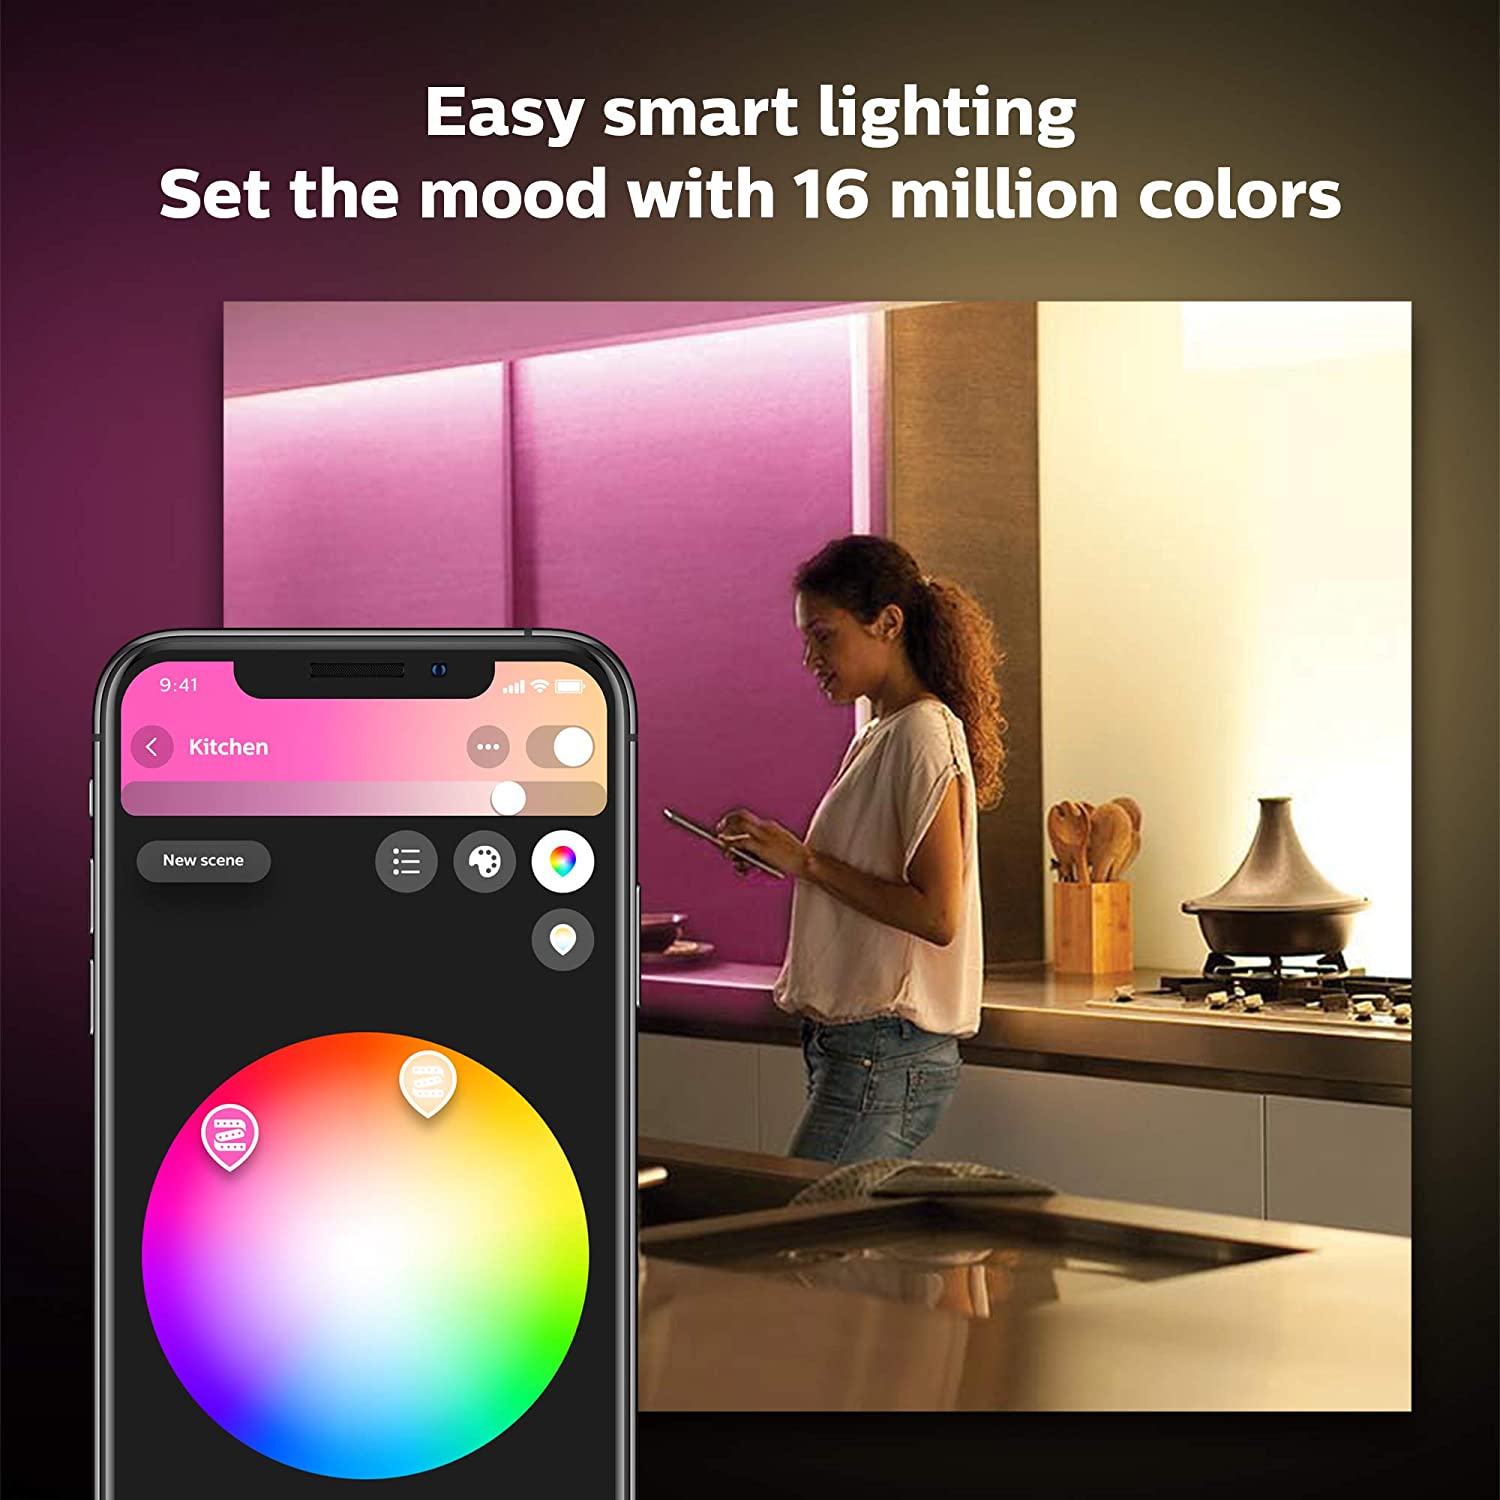 Philips Hue Lightstrip Plus 1M with Bluetooth - White and Colour Ambiance - New